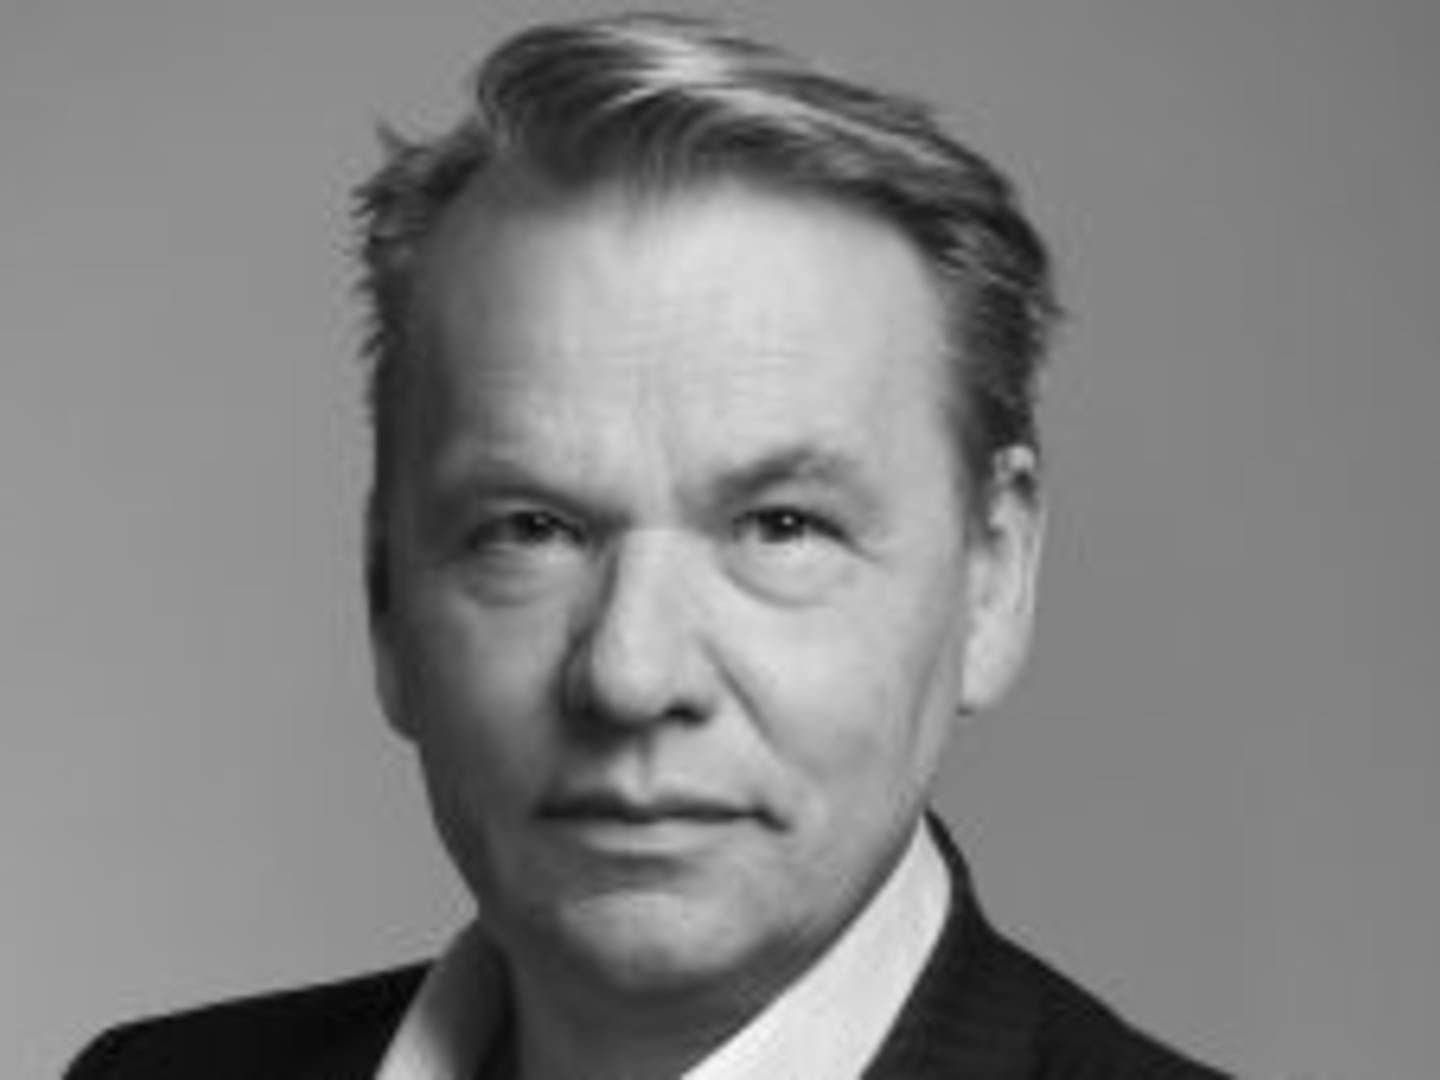 Ole Ertvaag is the founding partner & CEO of HitecVision. He held the position of CFO and COO in Hitec ASA before HitecVision was established in 2000. | Photo: PR/HitecVision